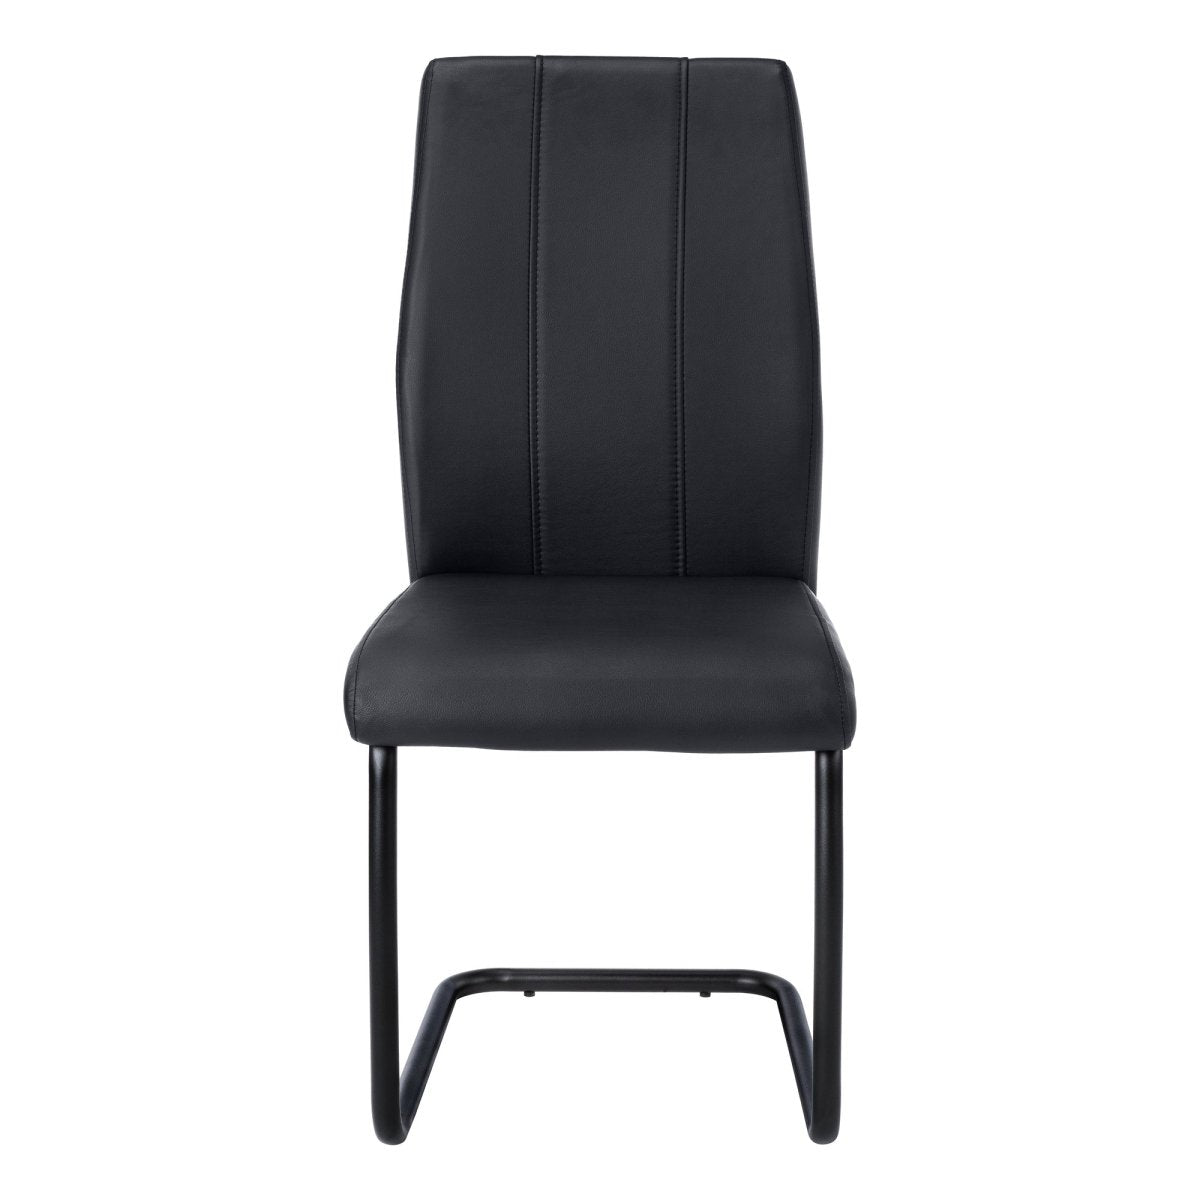 Black Upholstered Contemporary dining chair (set of two) - Rustic Furniture Outlet